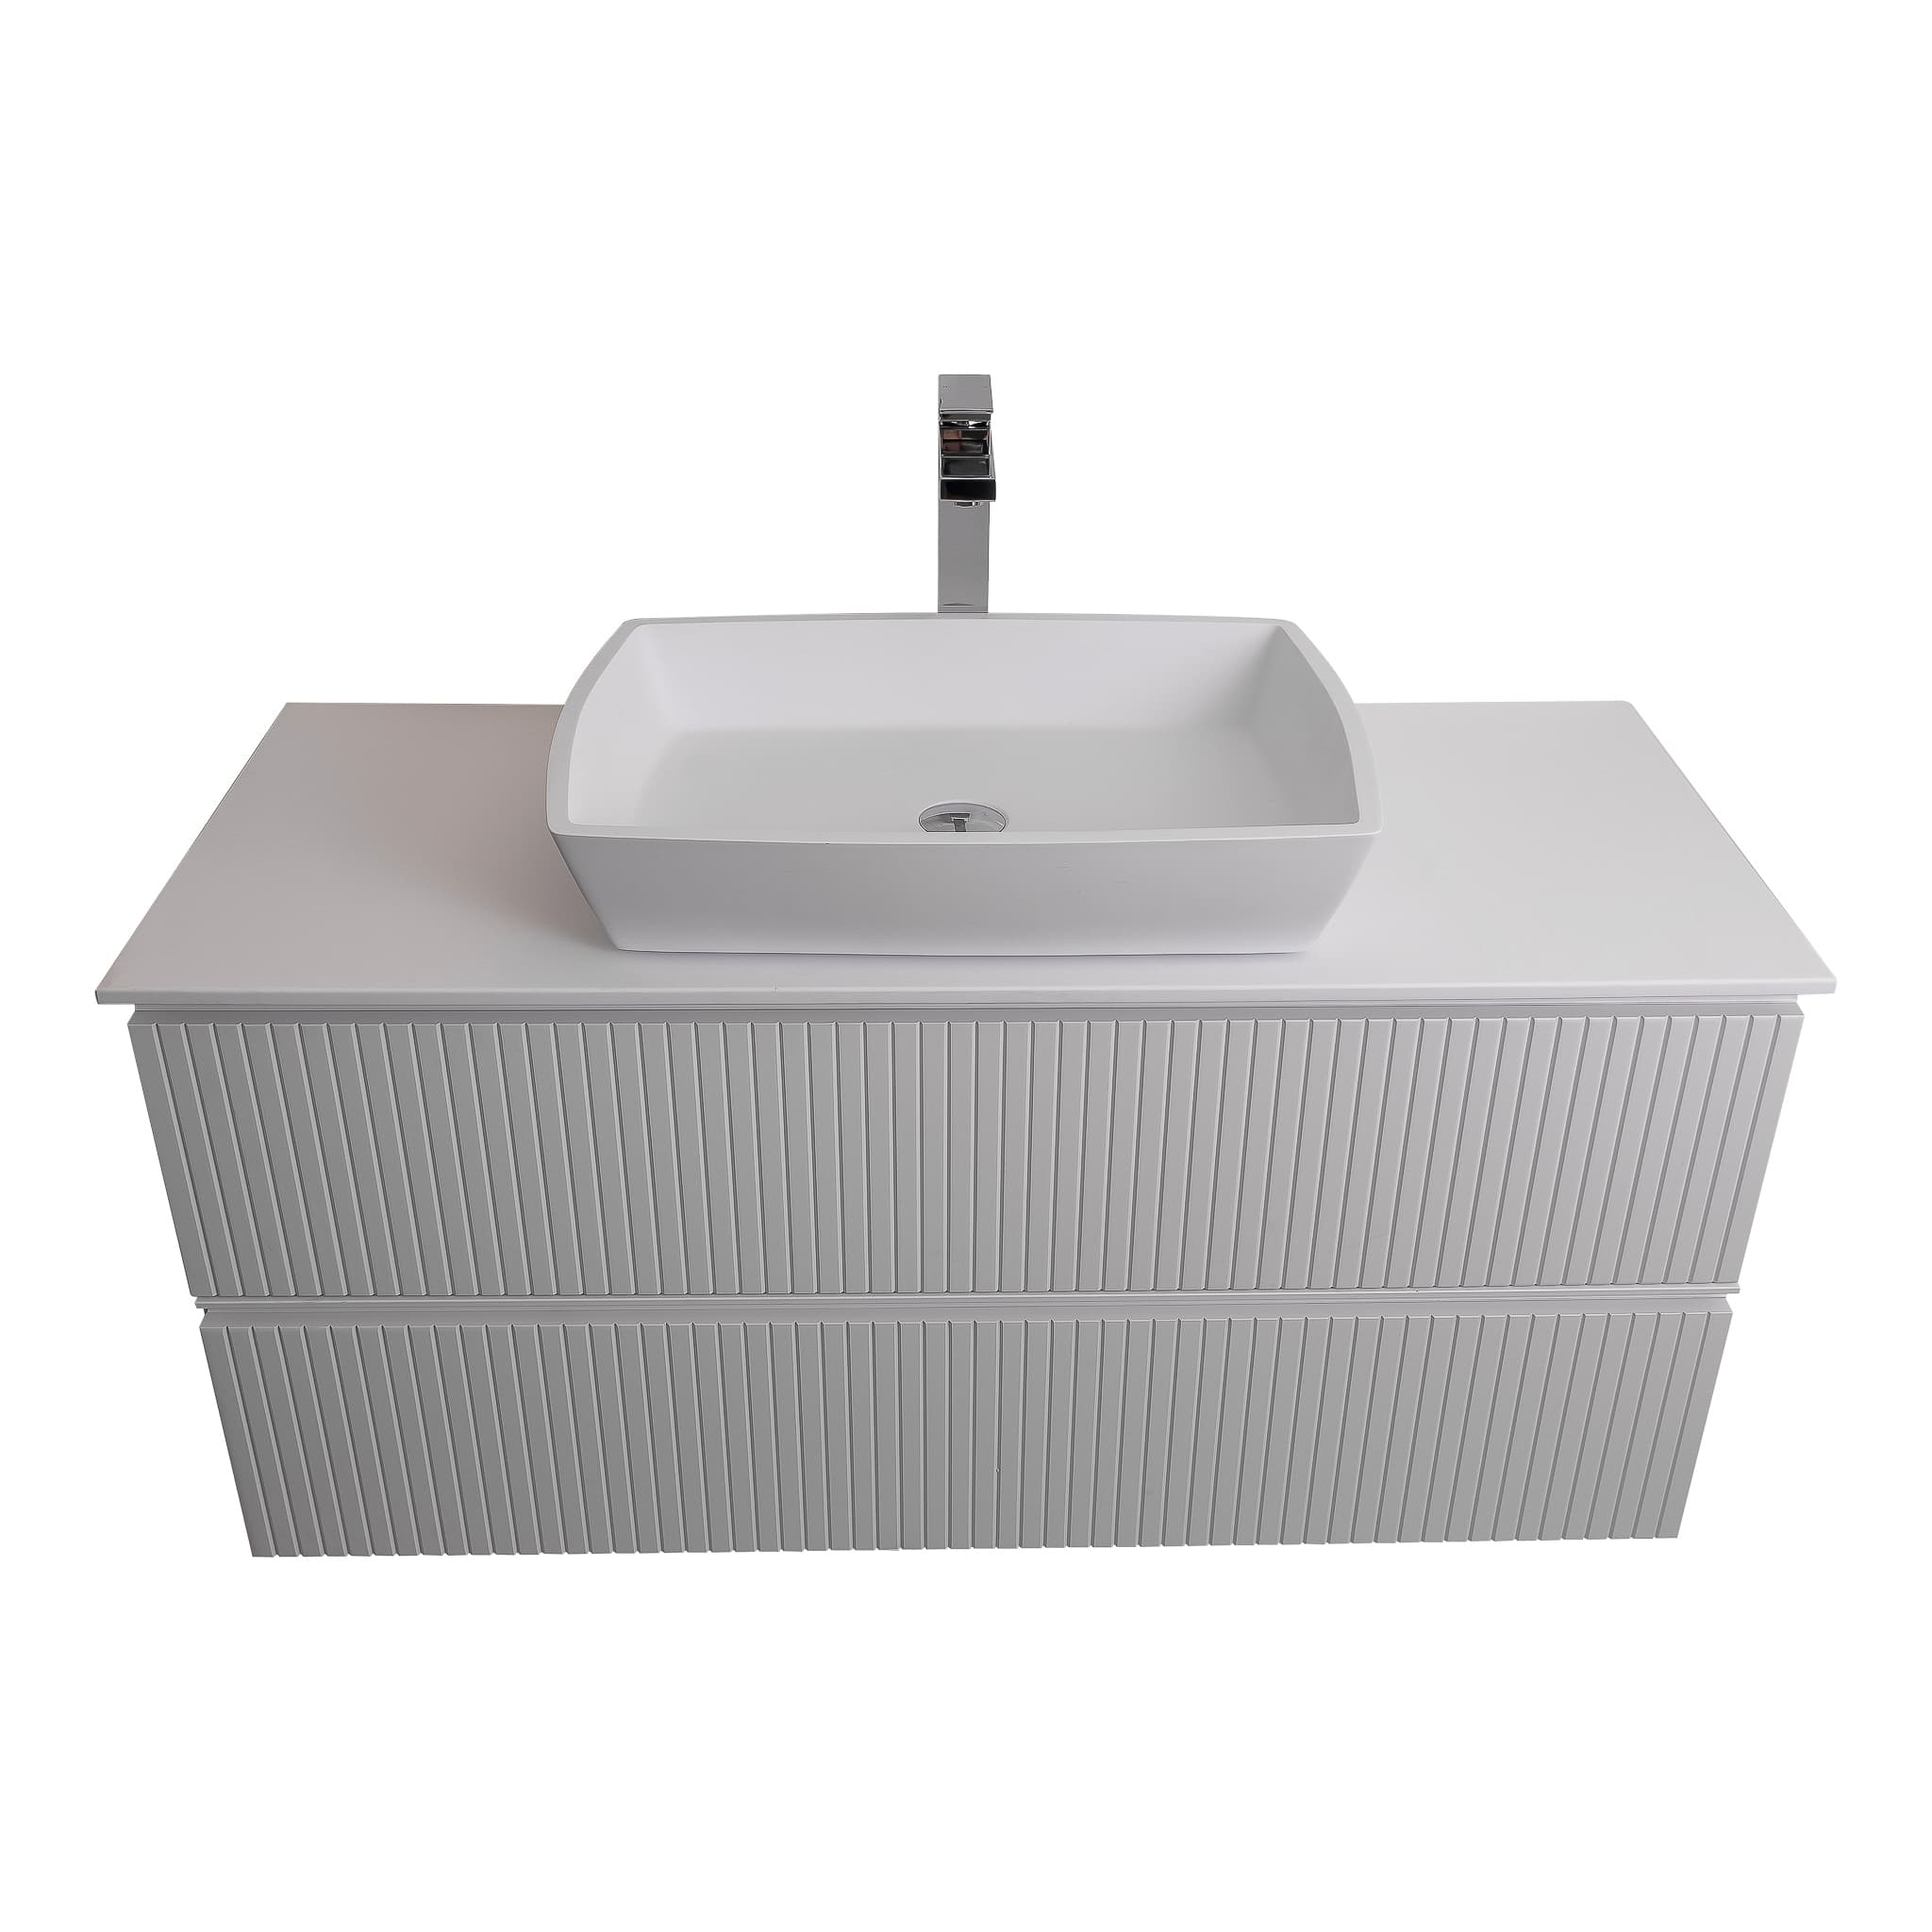 Ares 47.5 Matte White Cabinet, Solid Surface Flat White Counter And Square Solid Surface White Basin 1316, Wall Mounted Modern Vanity Set